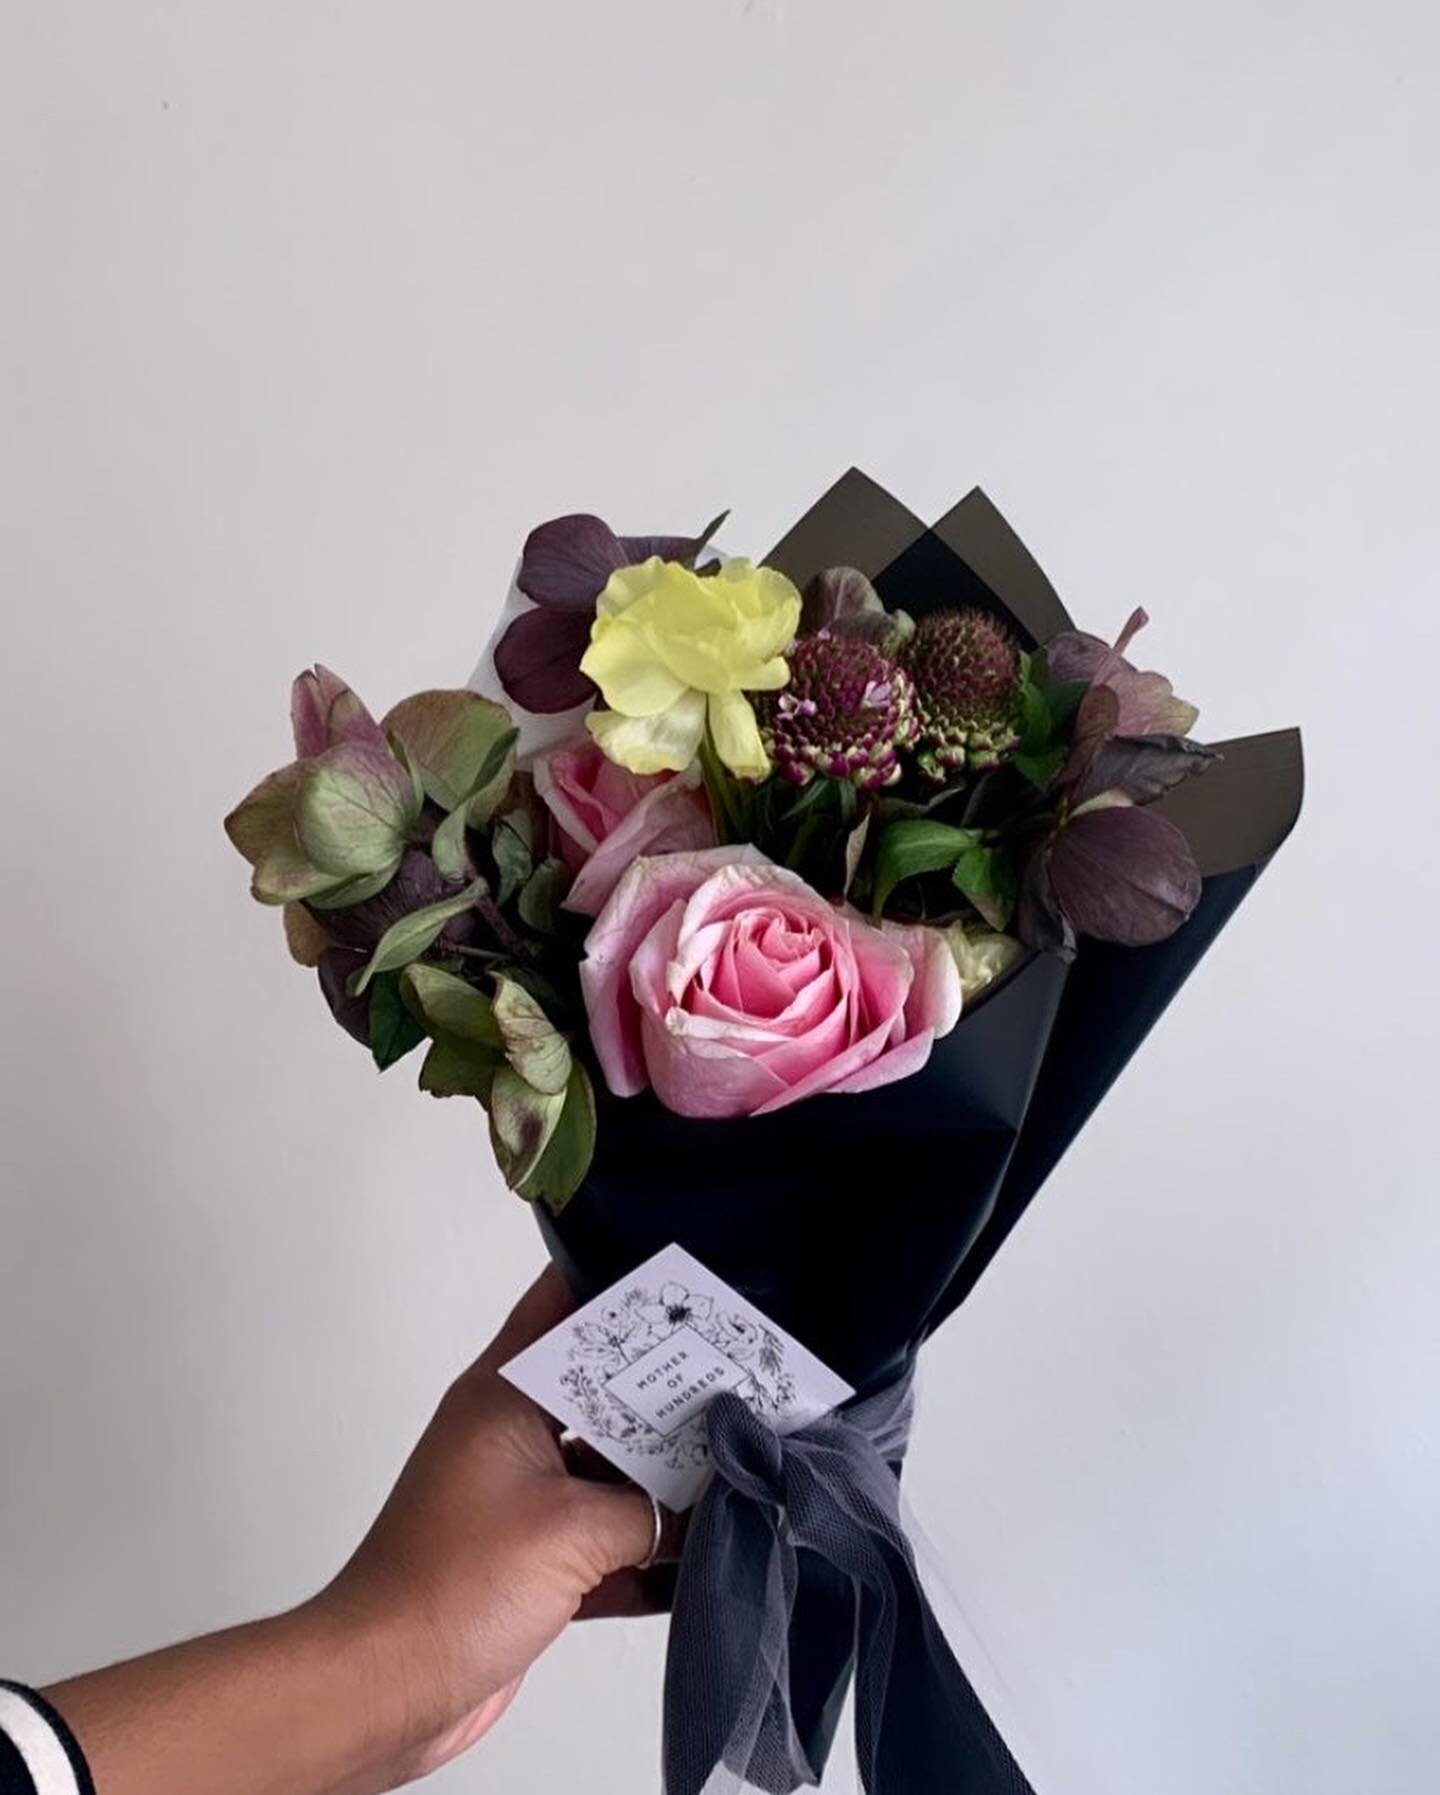 In collaboration with @prema_home and @premayogabrooklyn, MoH has created special mini-bouquets for the special woman (or women) in your life at an equally special price.

These are pick-up only bouquets and will be available from Friday May 6th unti